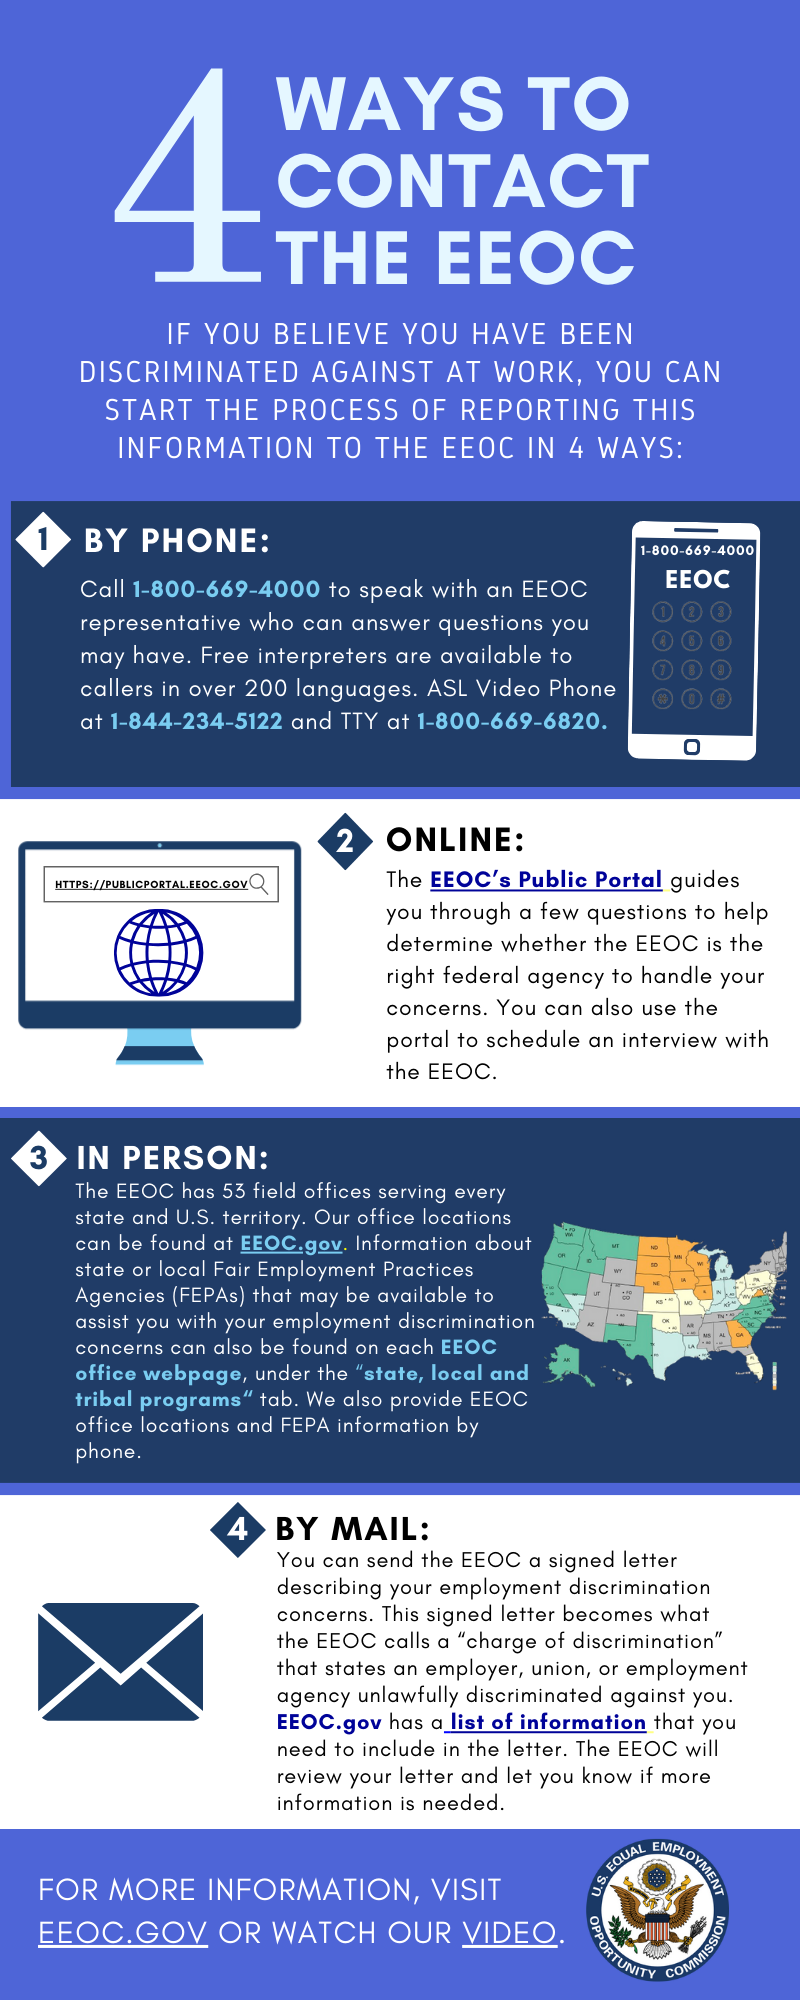 4 Ways to Contact the EEOC